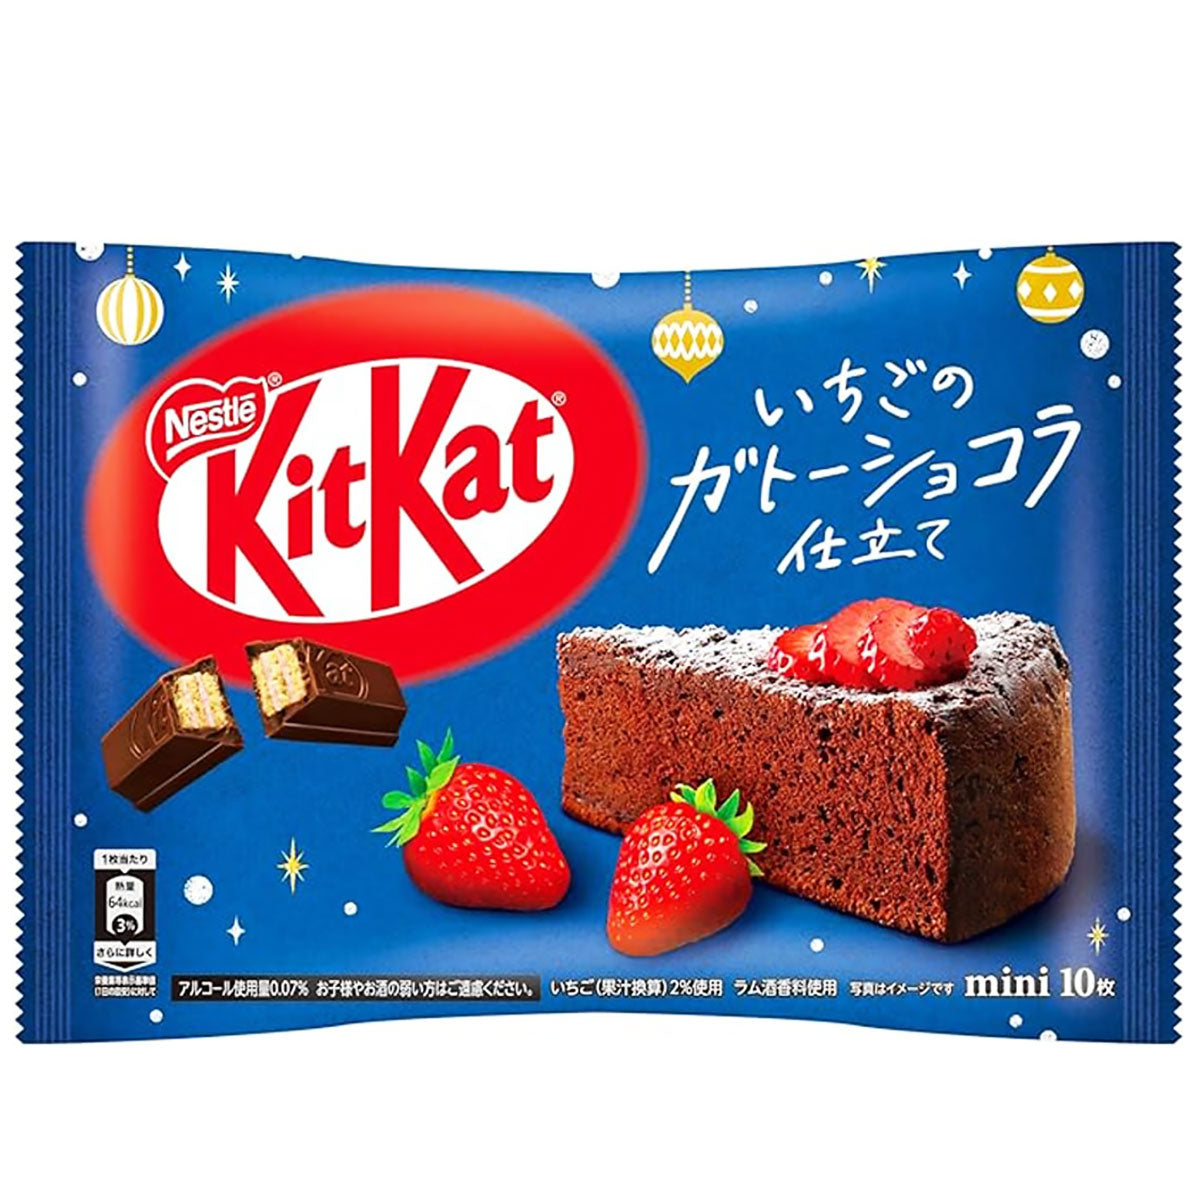 Kit Kat Mini Strawberry Gateau Wafer Biscuits in Chocolate - 116g